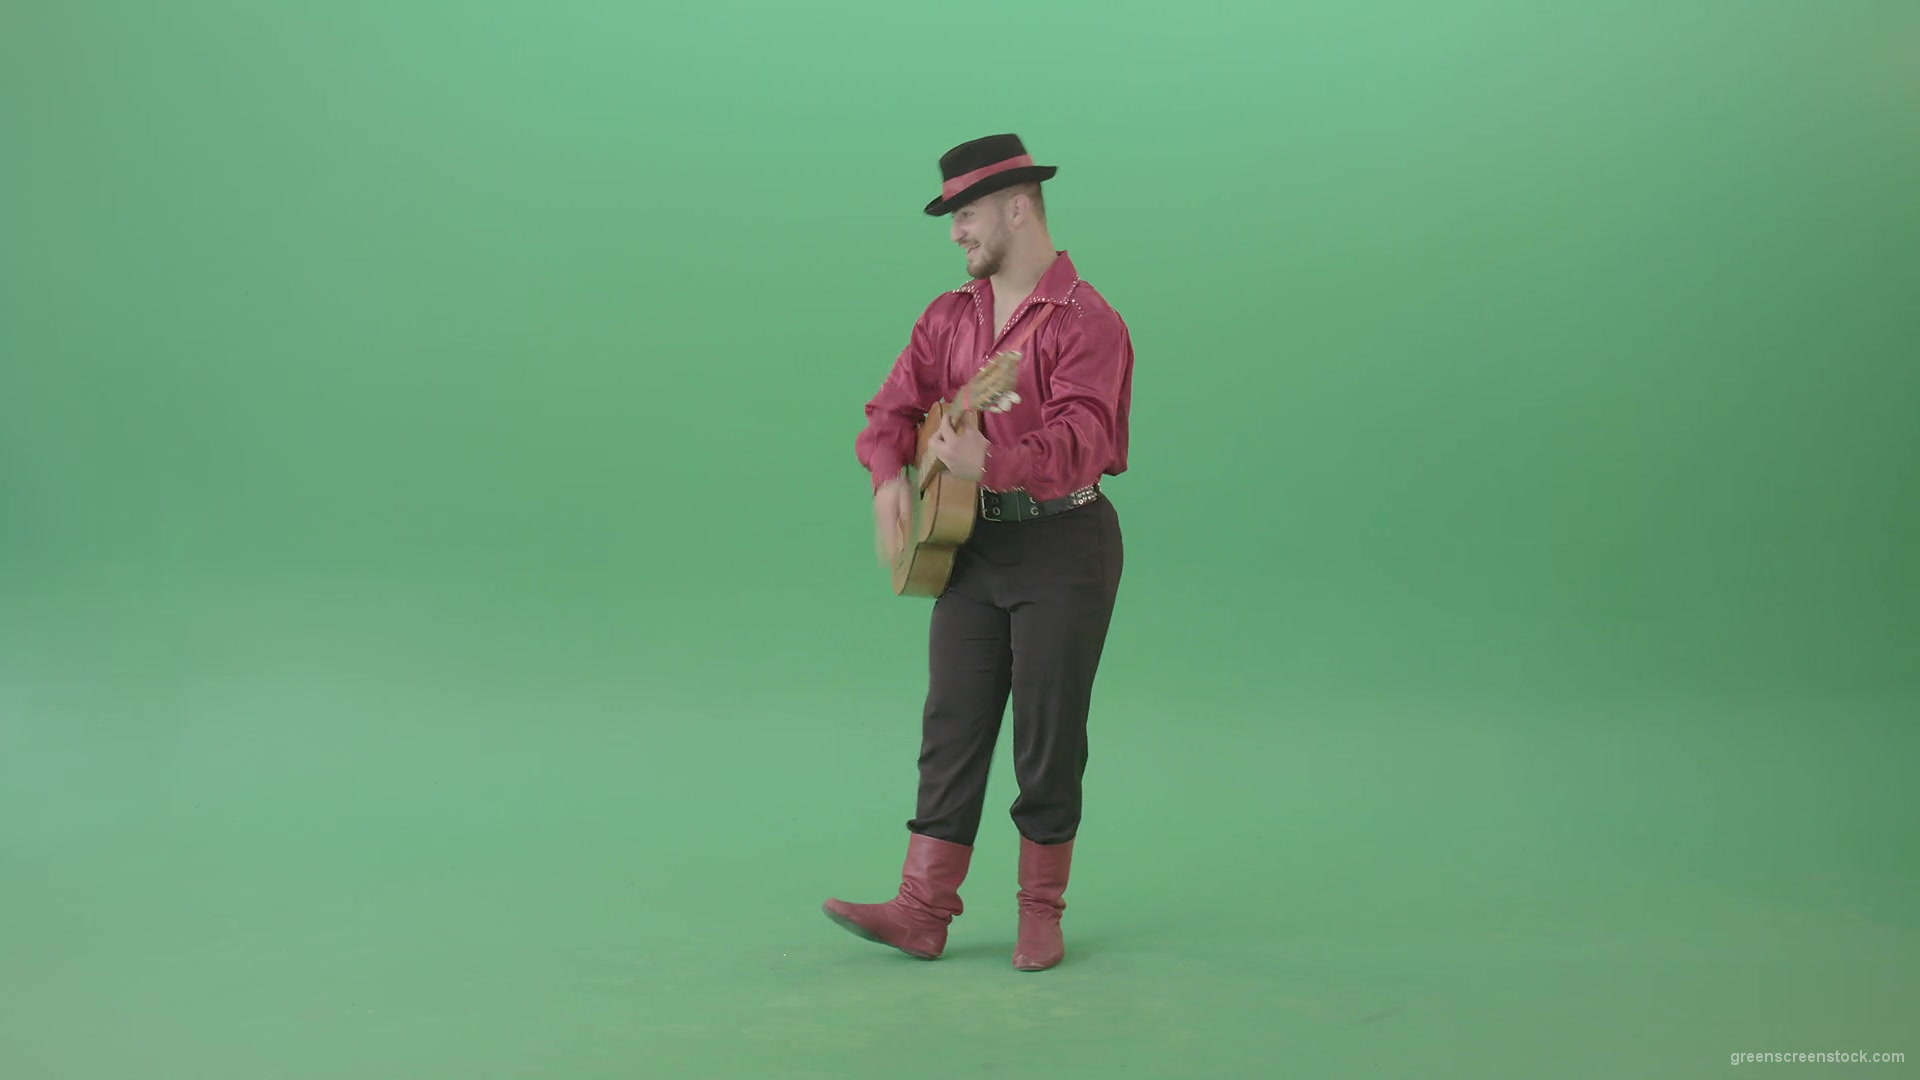 Balkan-Gipsy-man-in-red-shirt-playing-guitar-isolated-on-green-screen-4K-Video-Footage-1920_009 Green Screen Stock